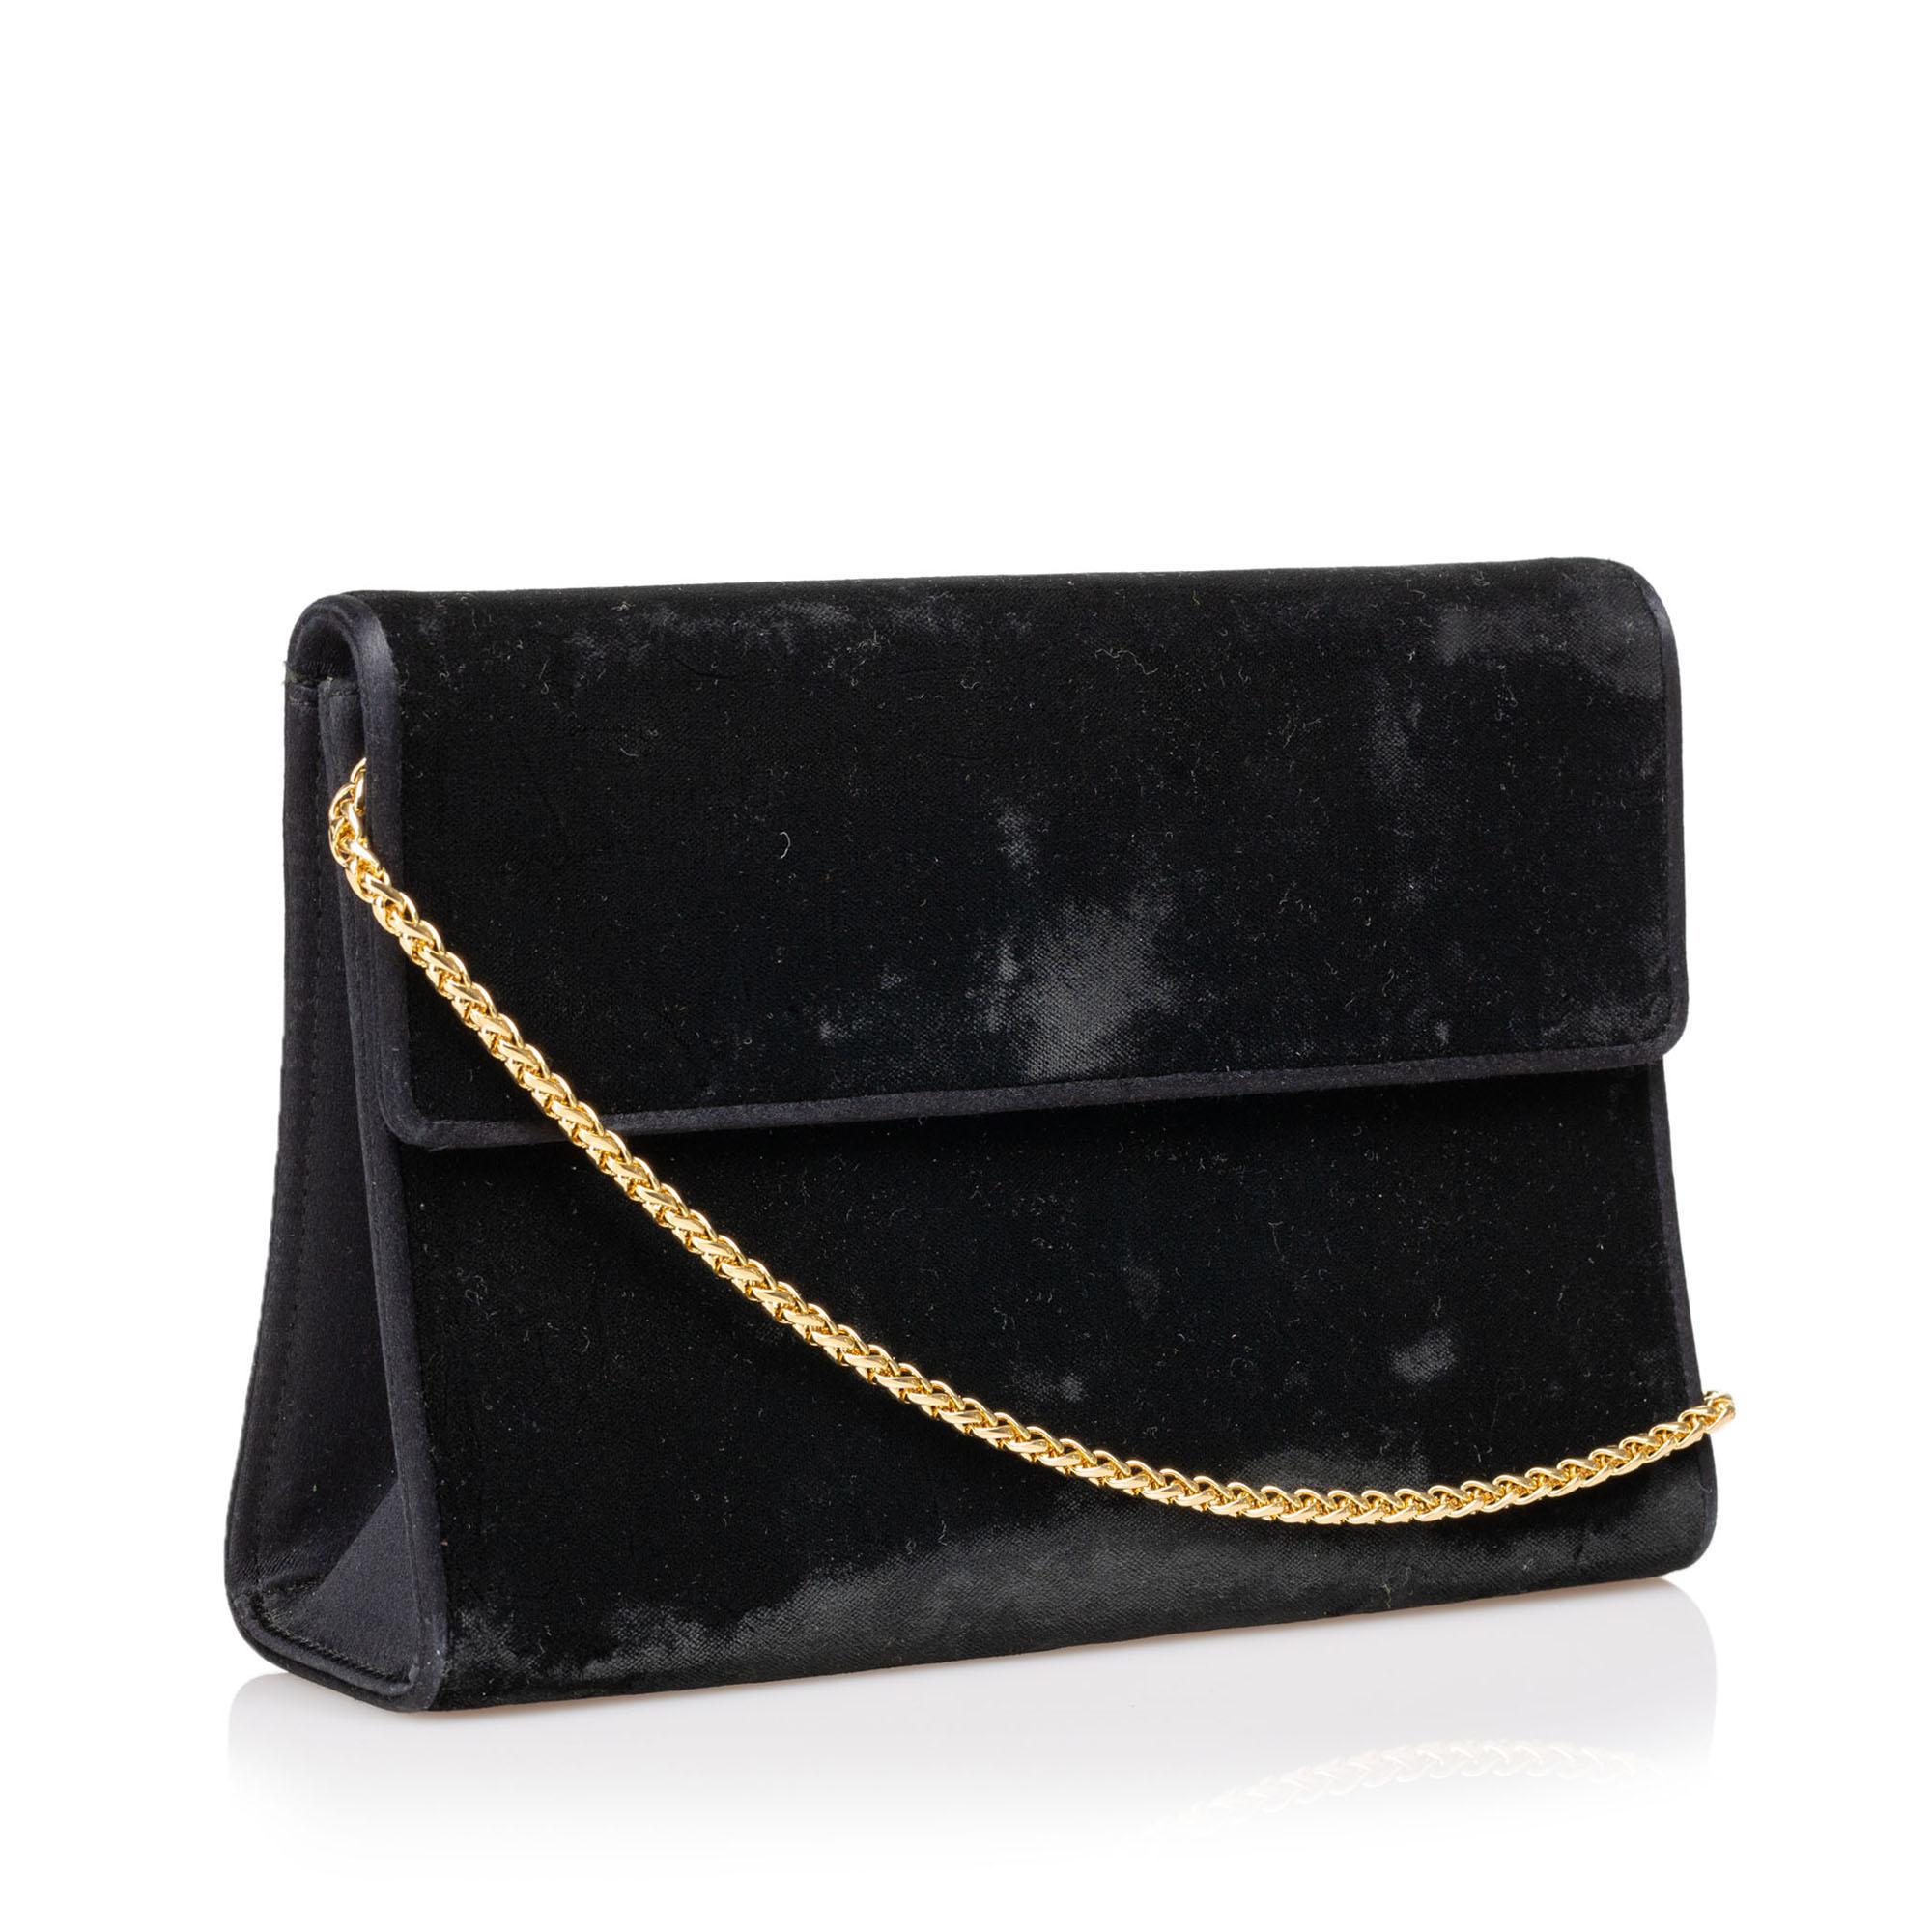 This crossbody bag features a velour body, a gold-tone chain strap, a top flap, an open top, and an interior slip pocket. It carries as B condition rating.

Inclusions: 
This item does not come with inclusions.

Dimensions:
Length: 25.00 cm
Width: